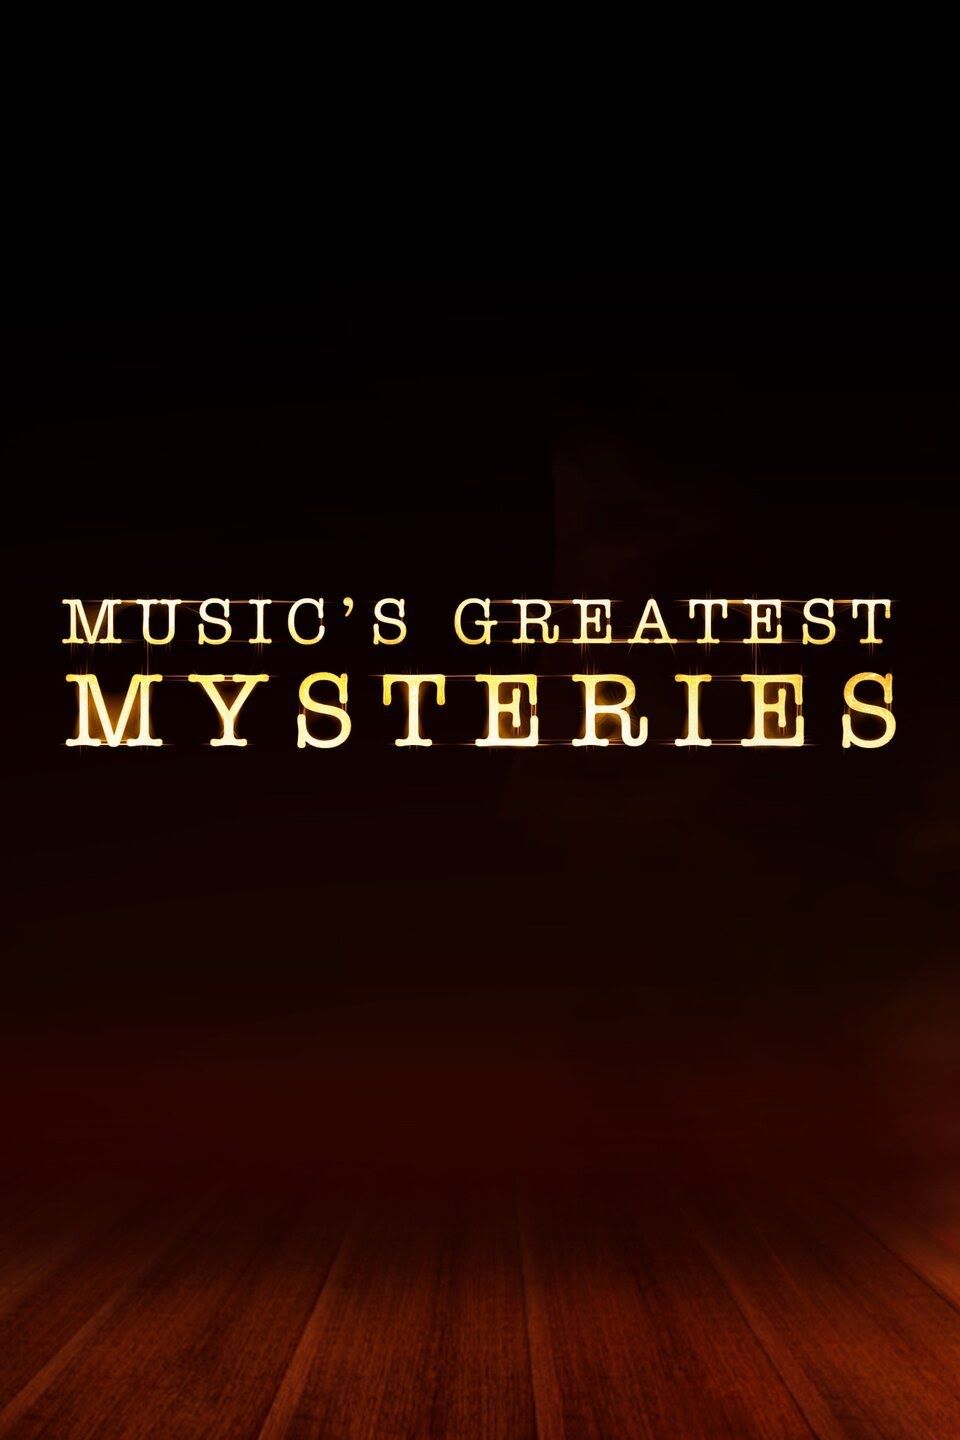 Great mystery. The Greatest Mysteries. Субтитры Music. Great Mysteries of the past компания.